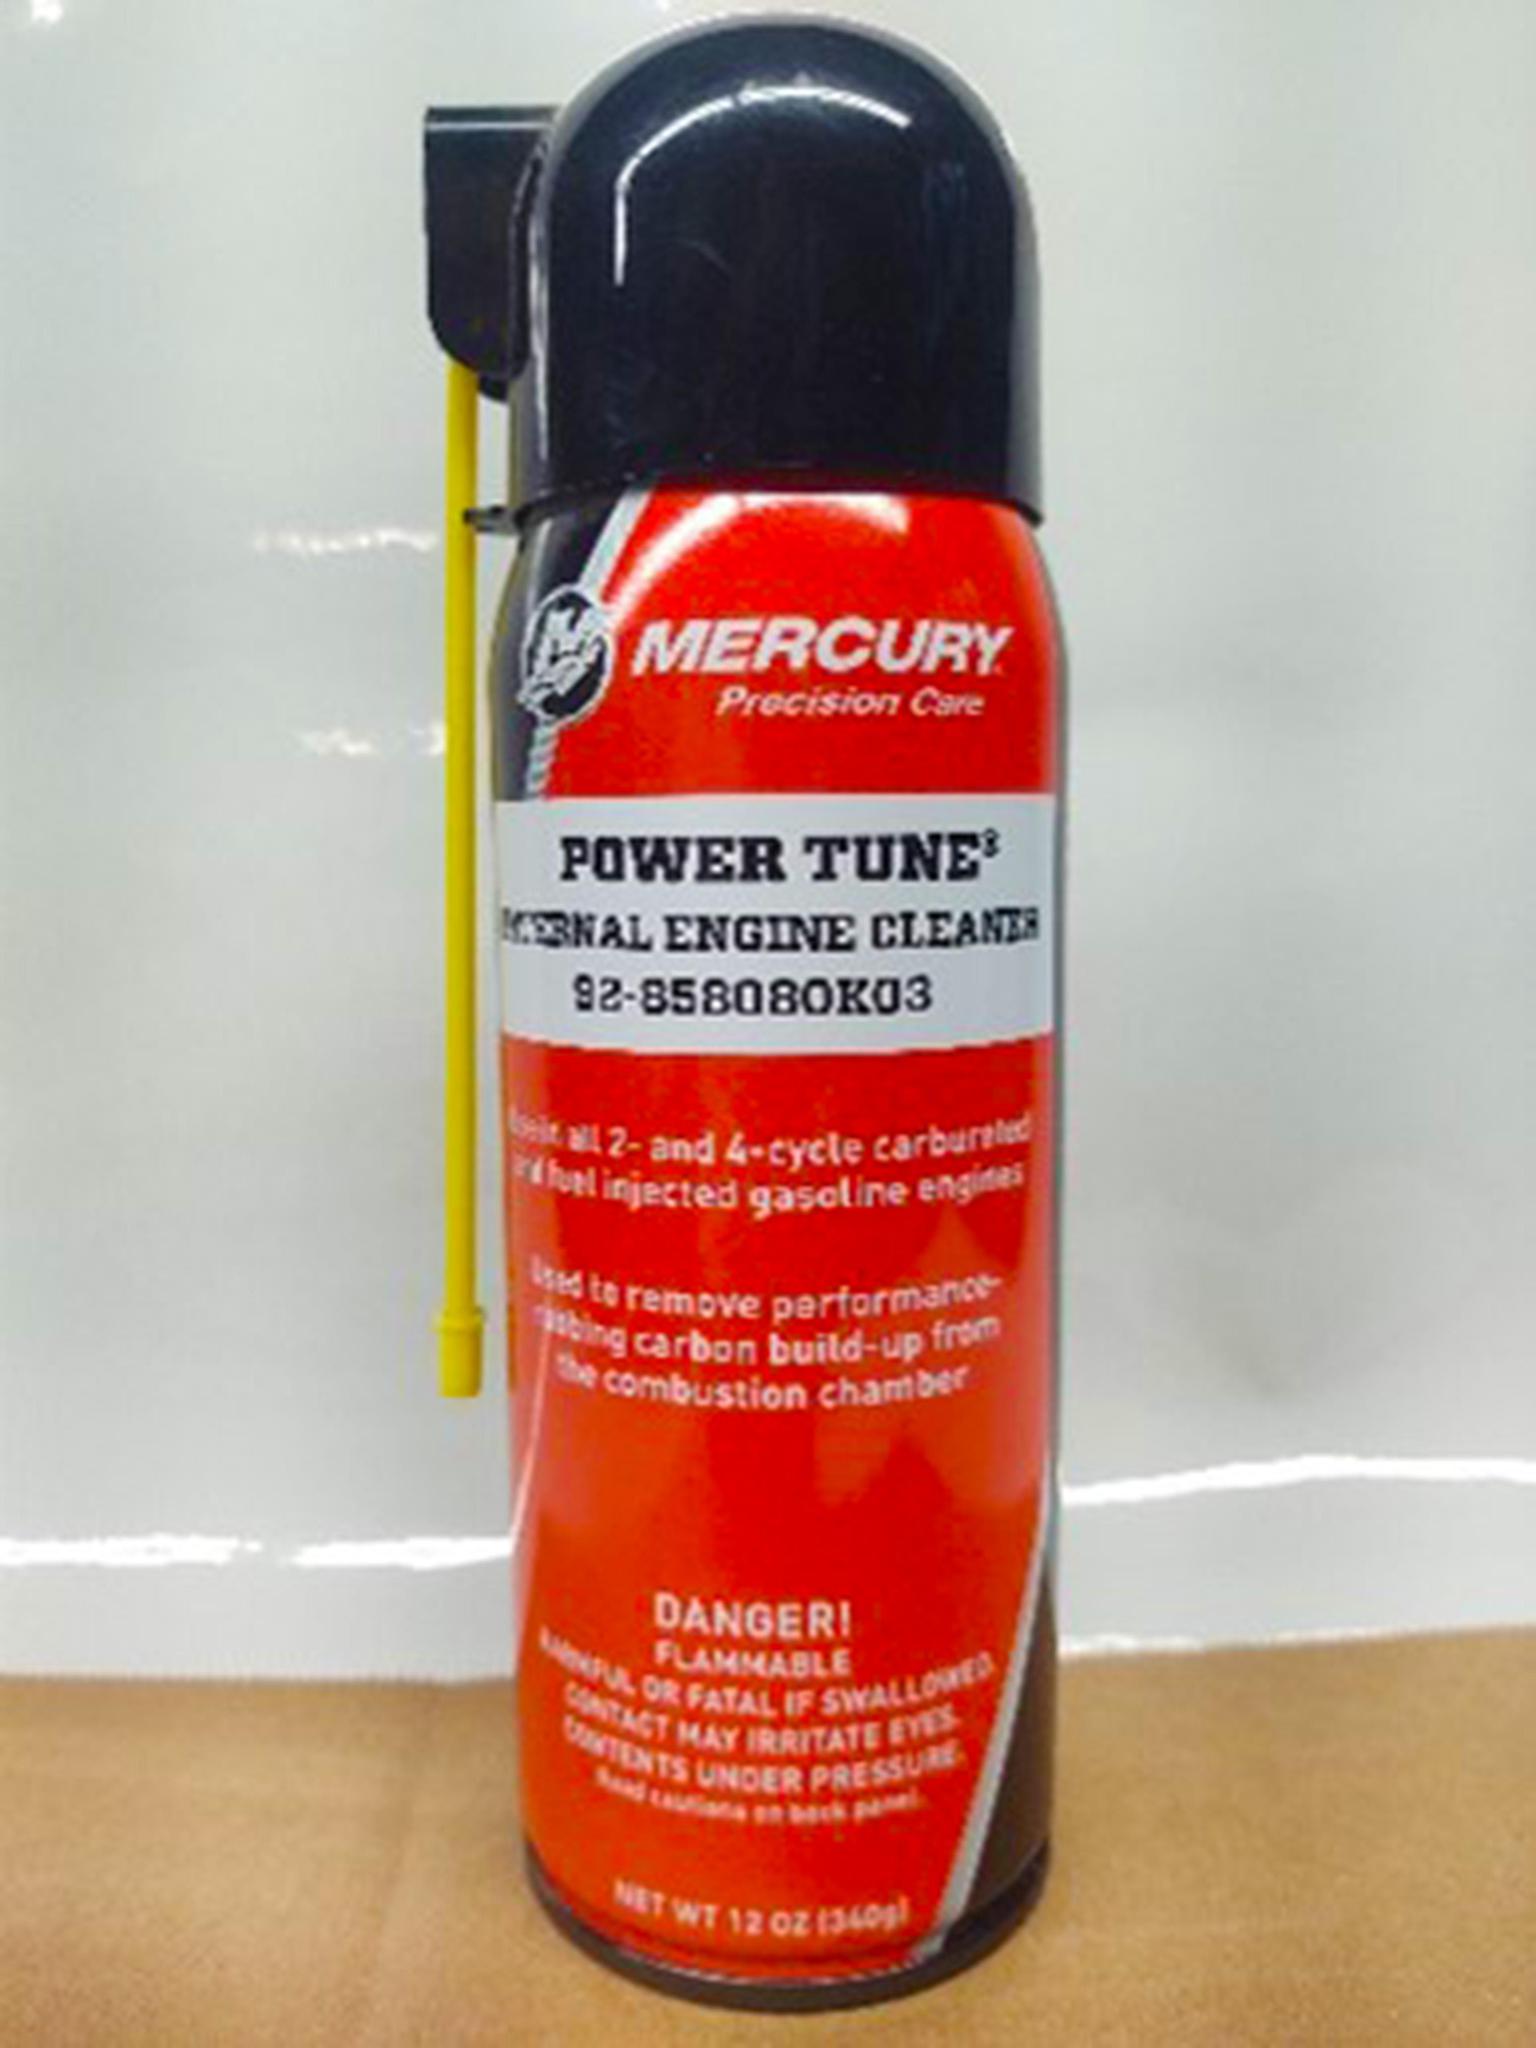 Mercury Power Tune Internal Engine Cleaner (Filter and Lubricants)